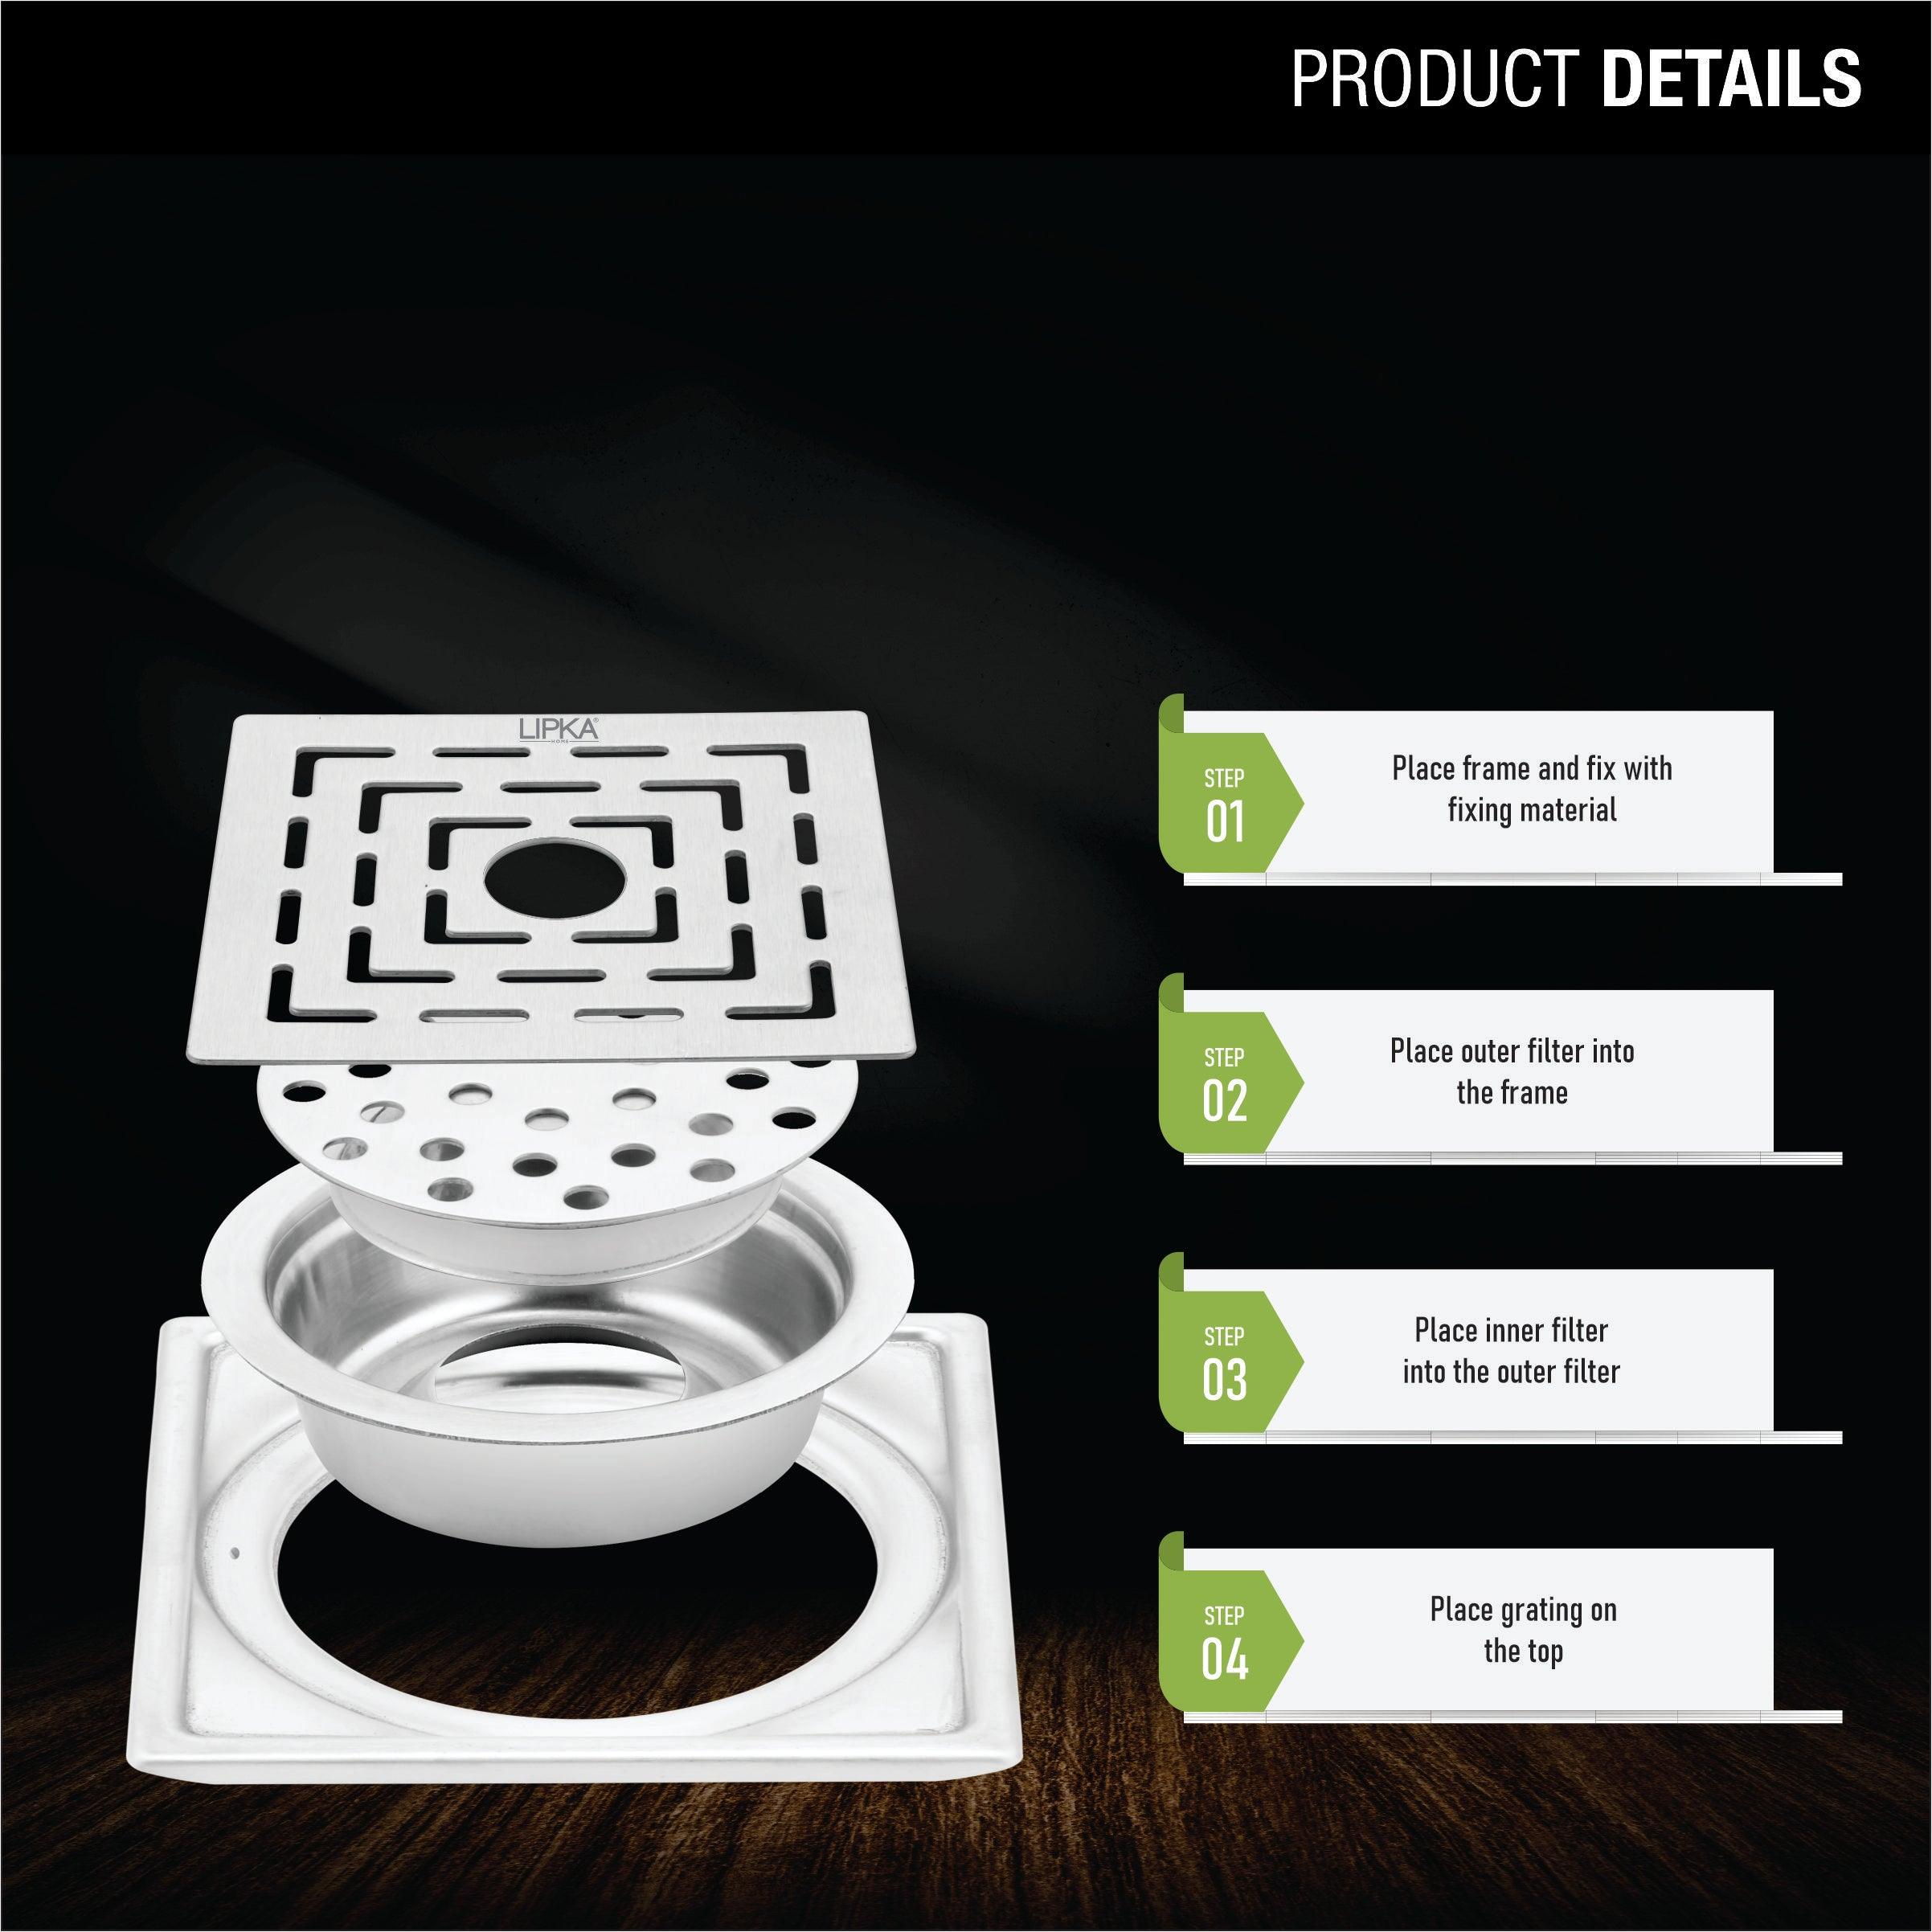 Orange Exclusive Square Floor Drain (5 x 5 Inches) with Hole and Cockroach Trap product details